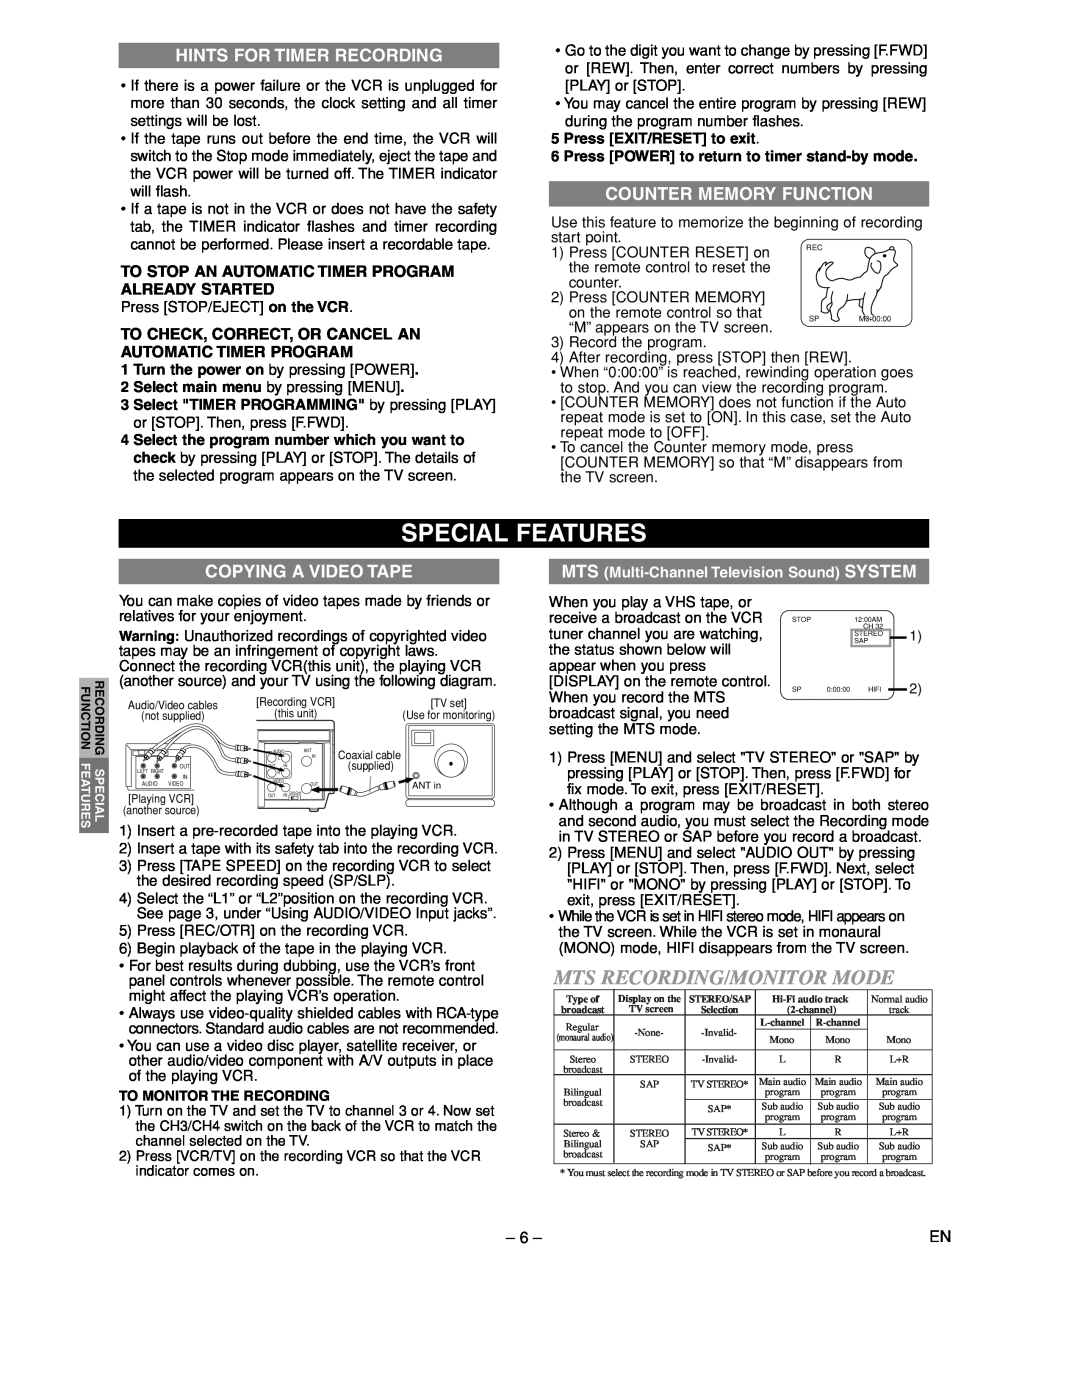 Sylvania 6265FC owner manual Special Features, Hints For Timer Recording, Counter Memory Function, Copying A Video Tape 